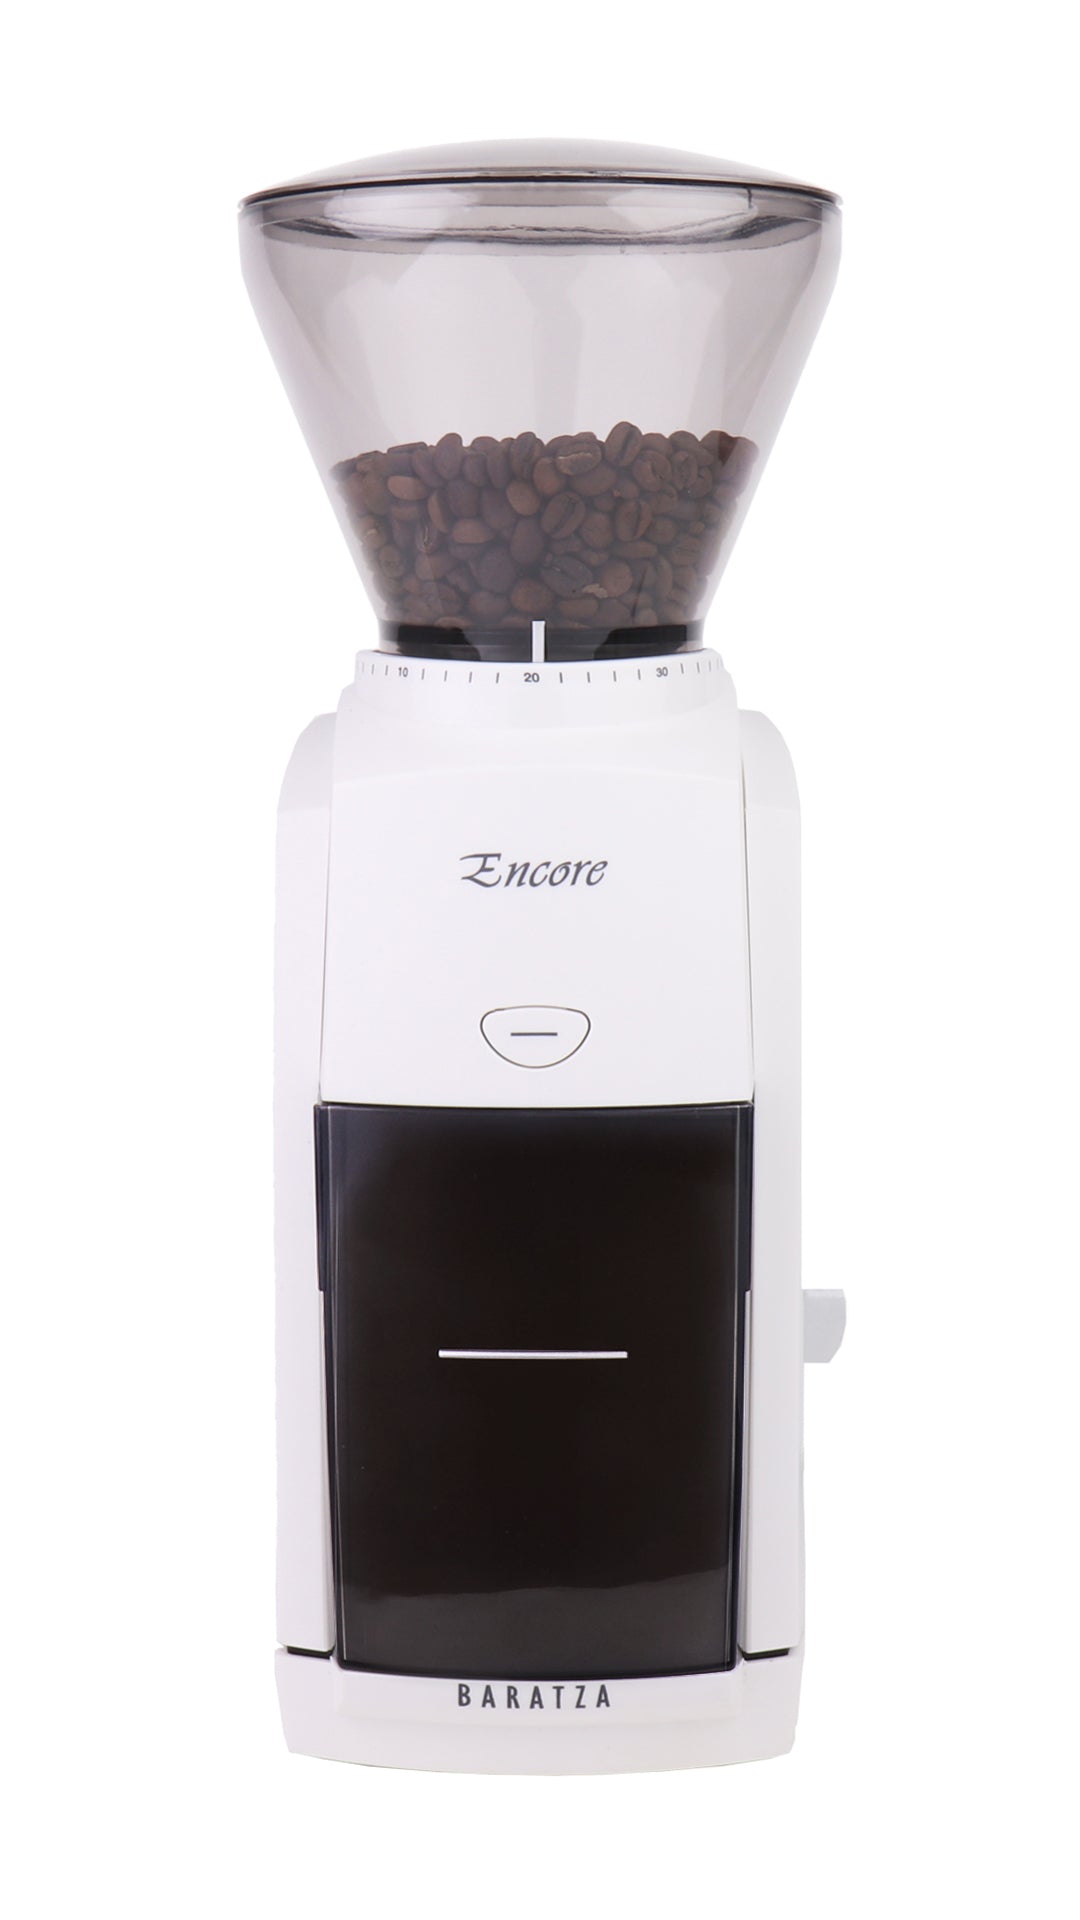 Conical Burr Coffee Grinder for Espresso with Precision Electronic Timer,  30 Degree Setting Coffee Bean Grinder